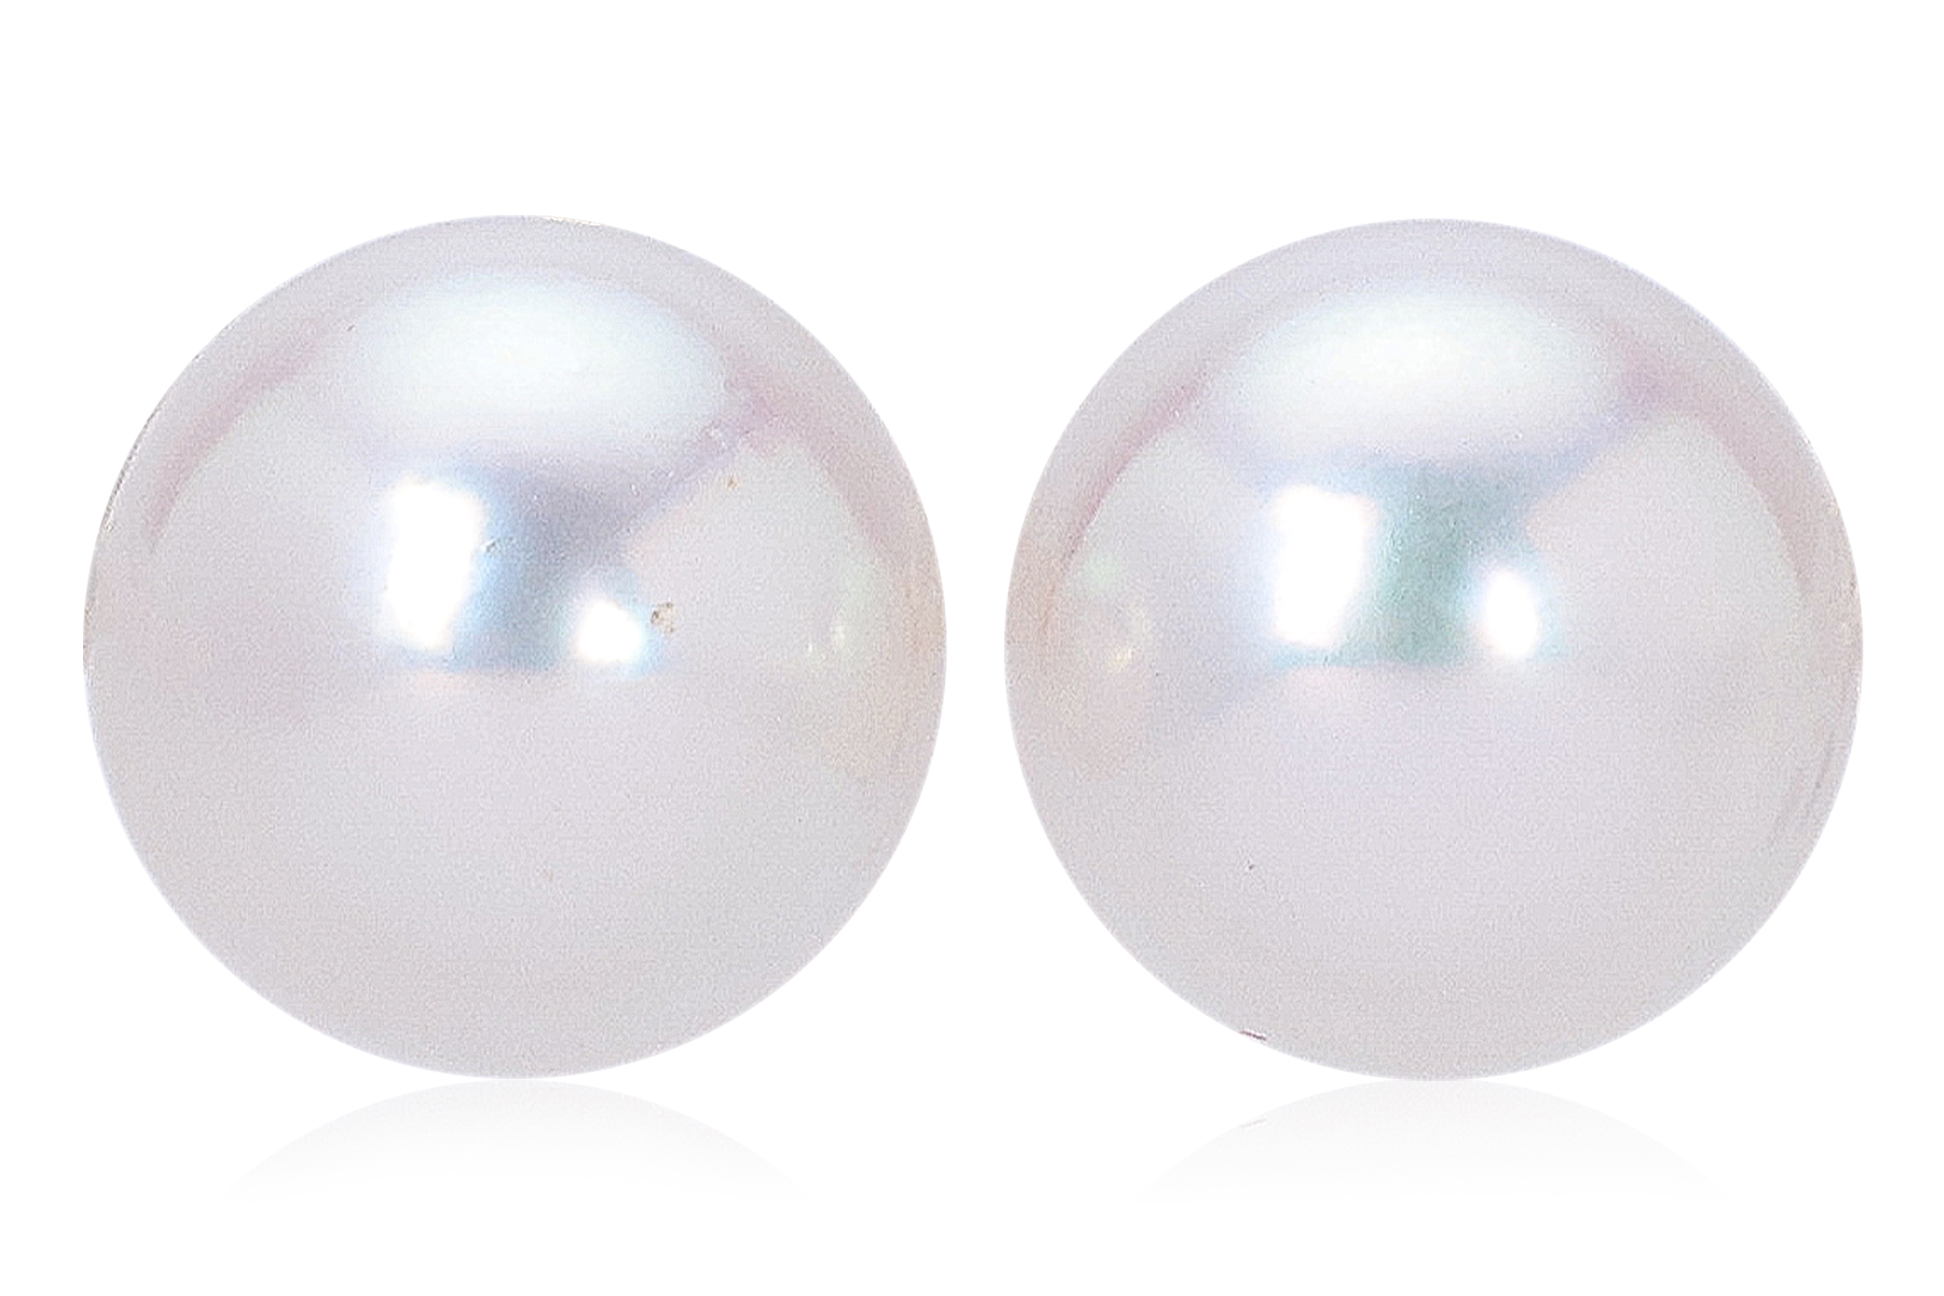 A PAIR OF CULTURED SOUTH SEA PEARL EARRINGS BY PASPALEY - Image 2 of 5